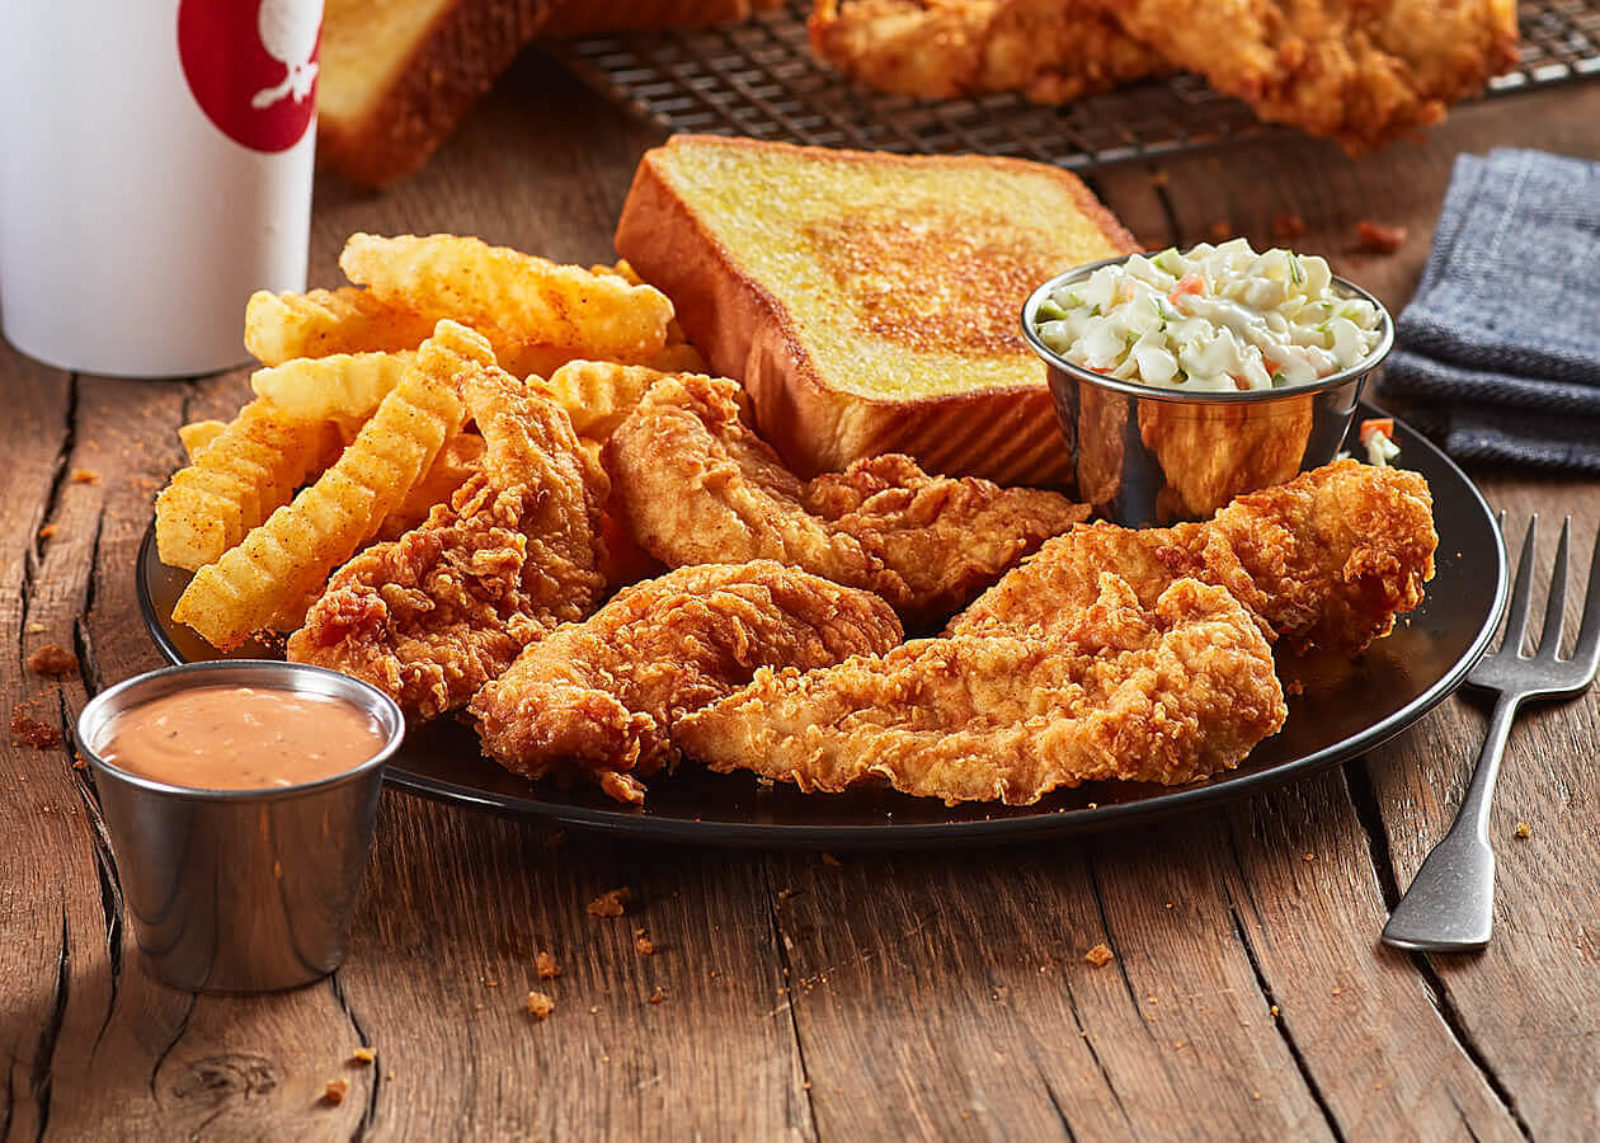 Zaxby's Food Operations Case Study